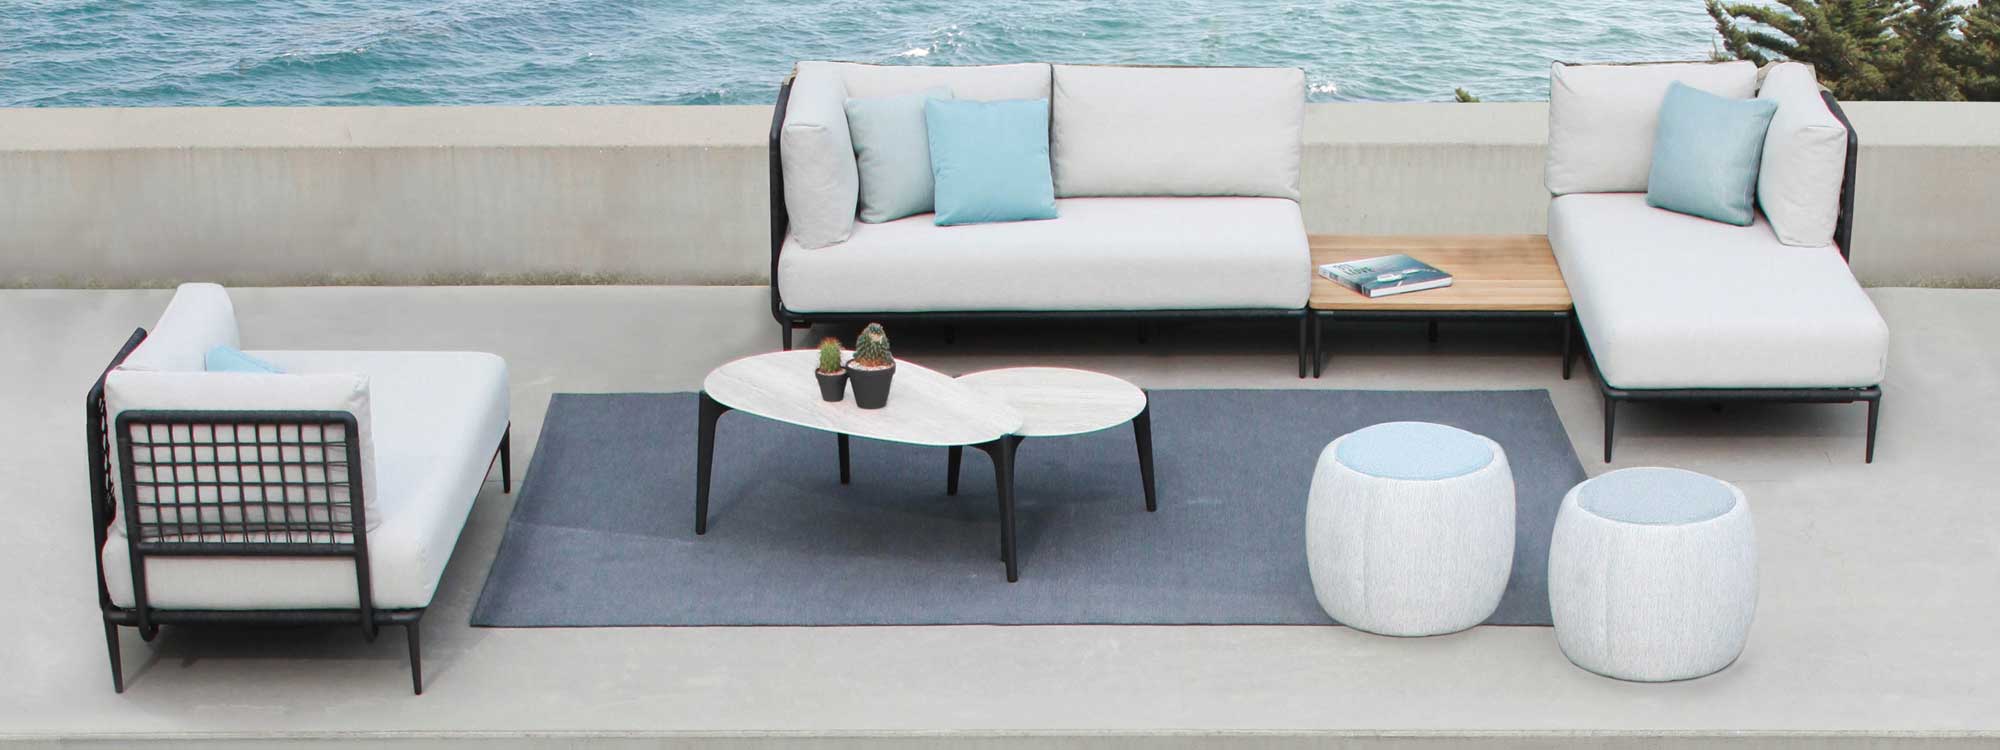 Tea Time occasional tables by Encompass outdoor furniture.